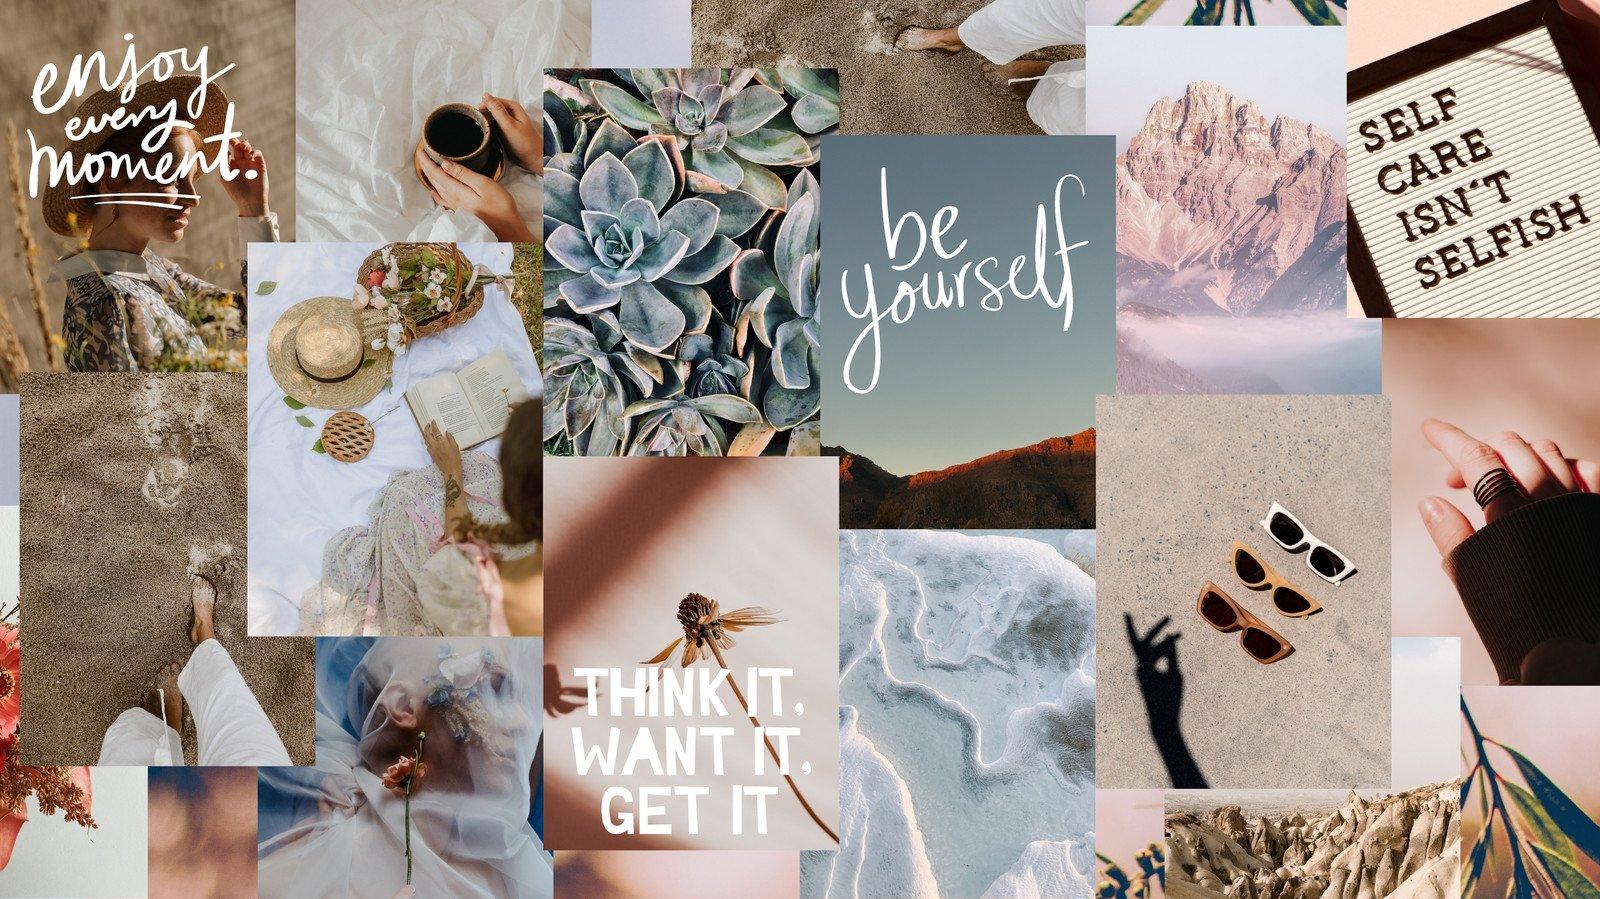 Free and fully customizable desktop wallpaper templates Canva